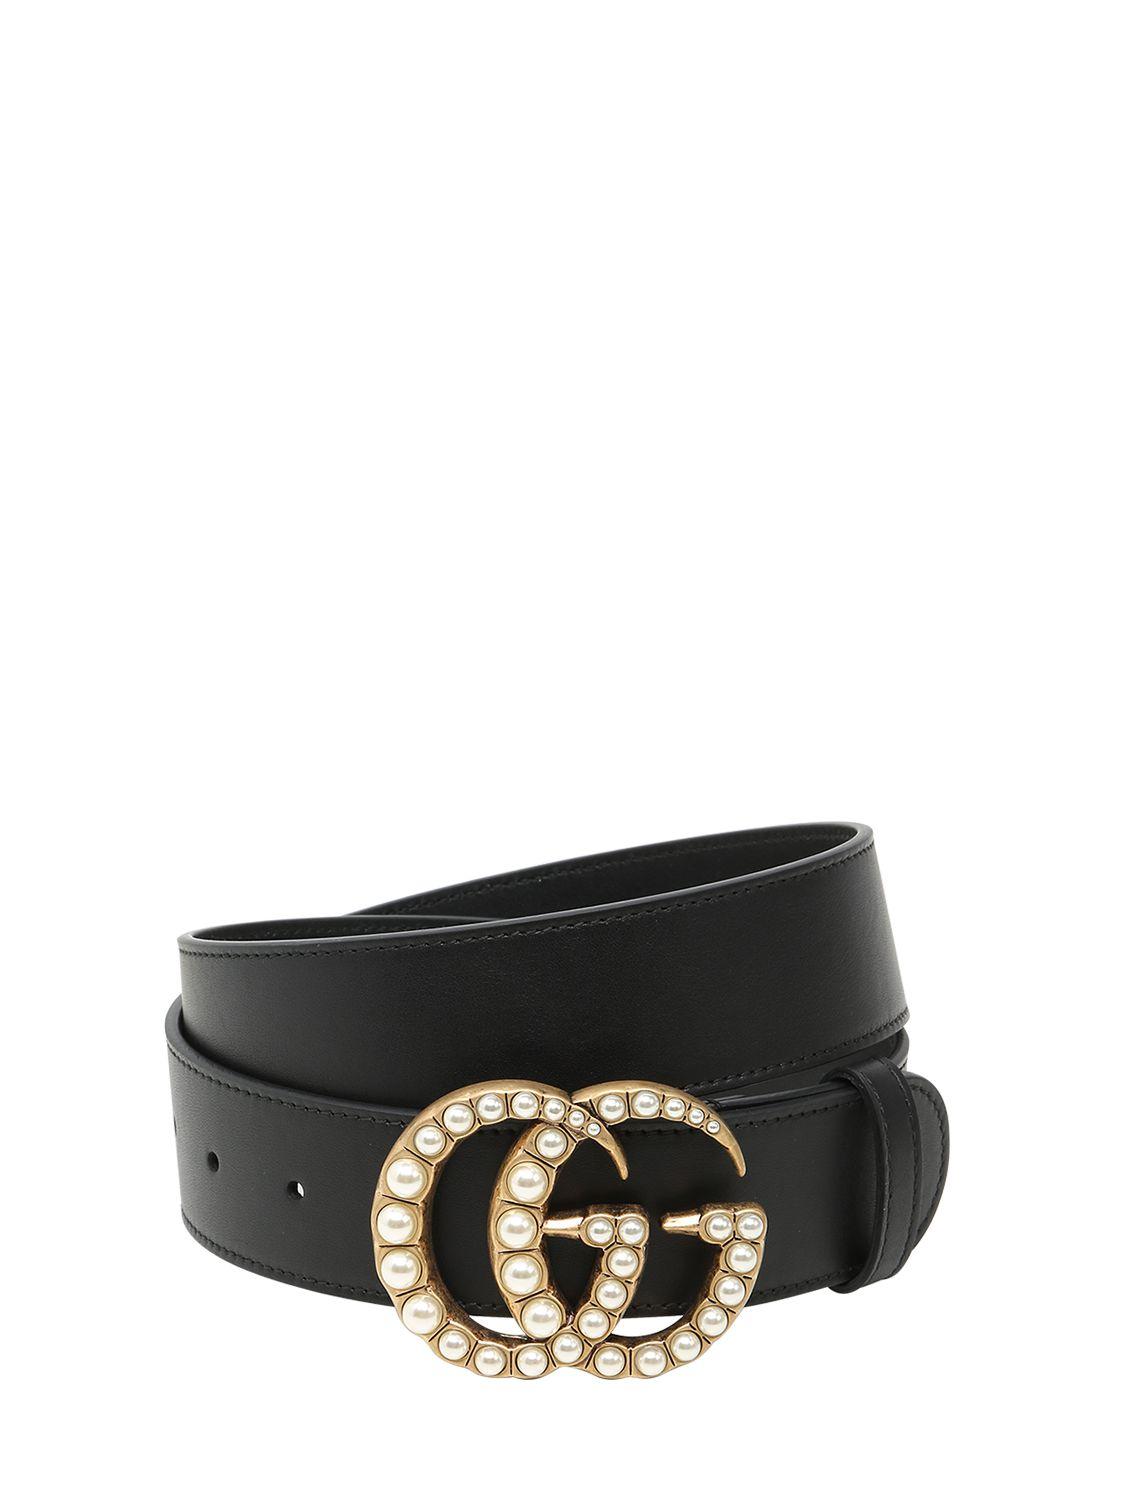 black gucci belt with pearls